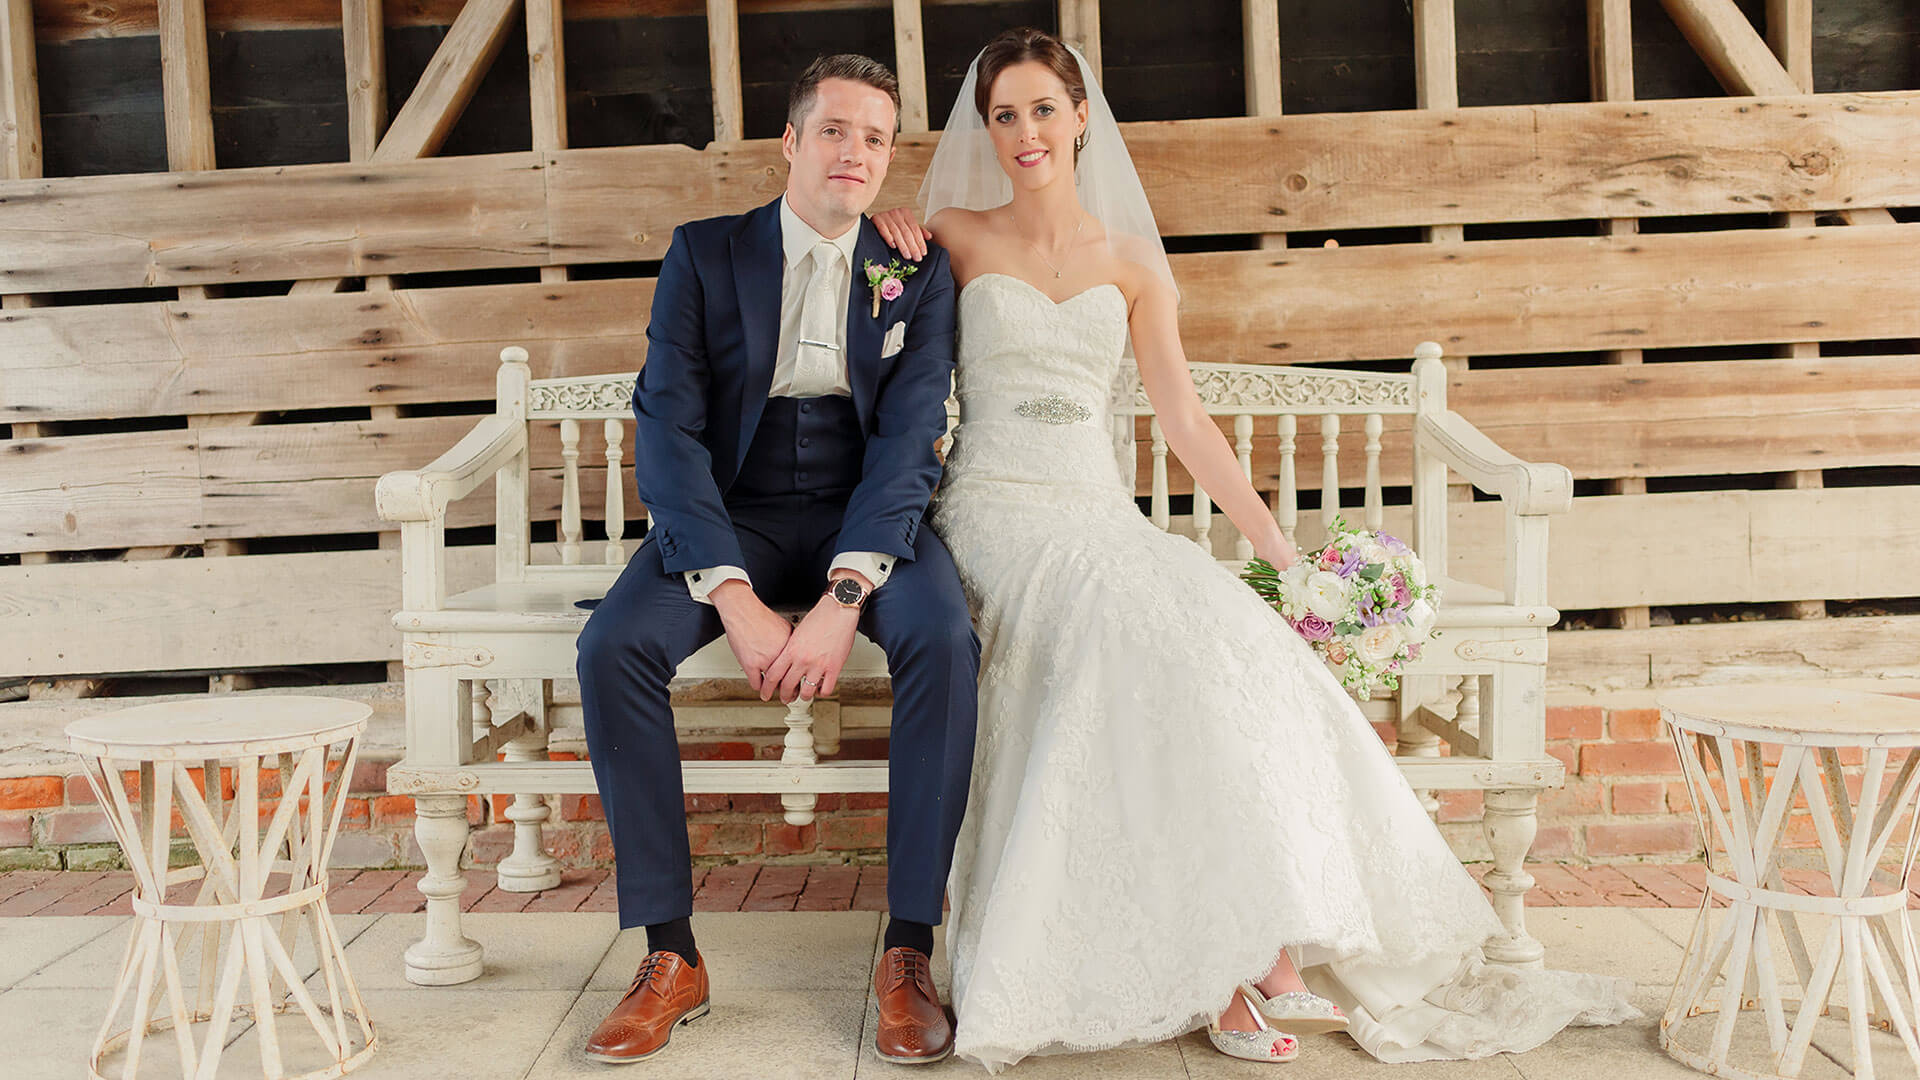 A bride and groom steal a moment on a white wedding bench - barn weddings Essex